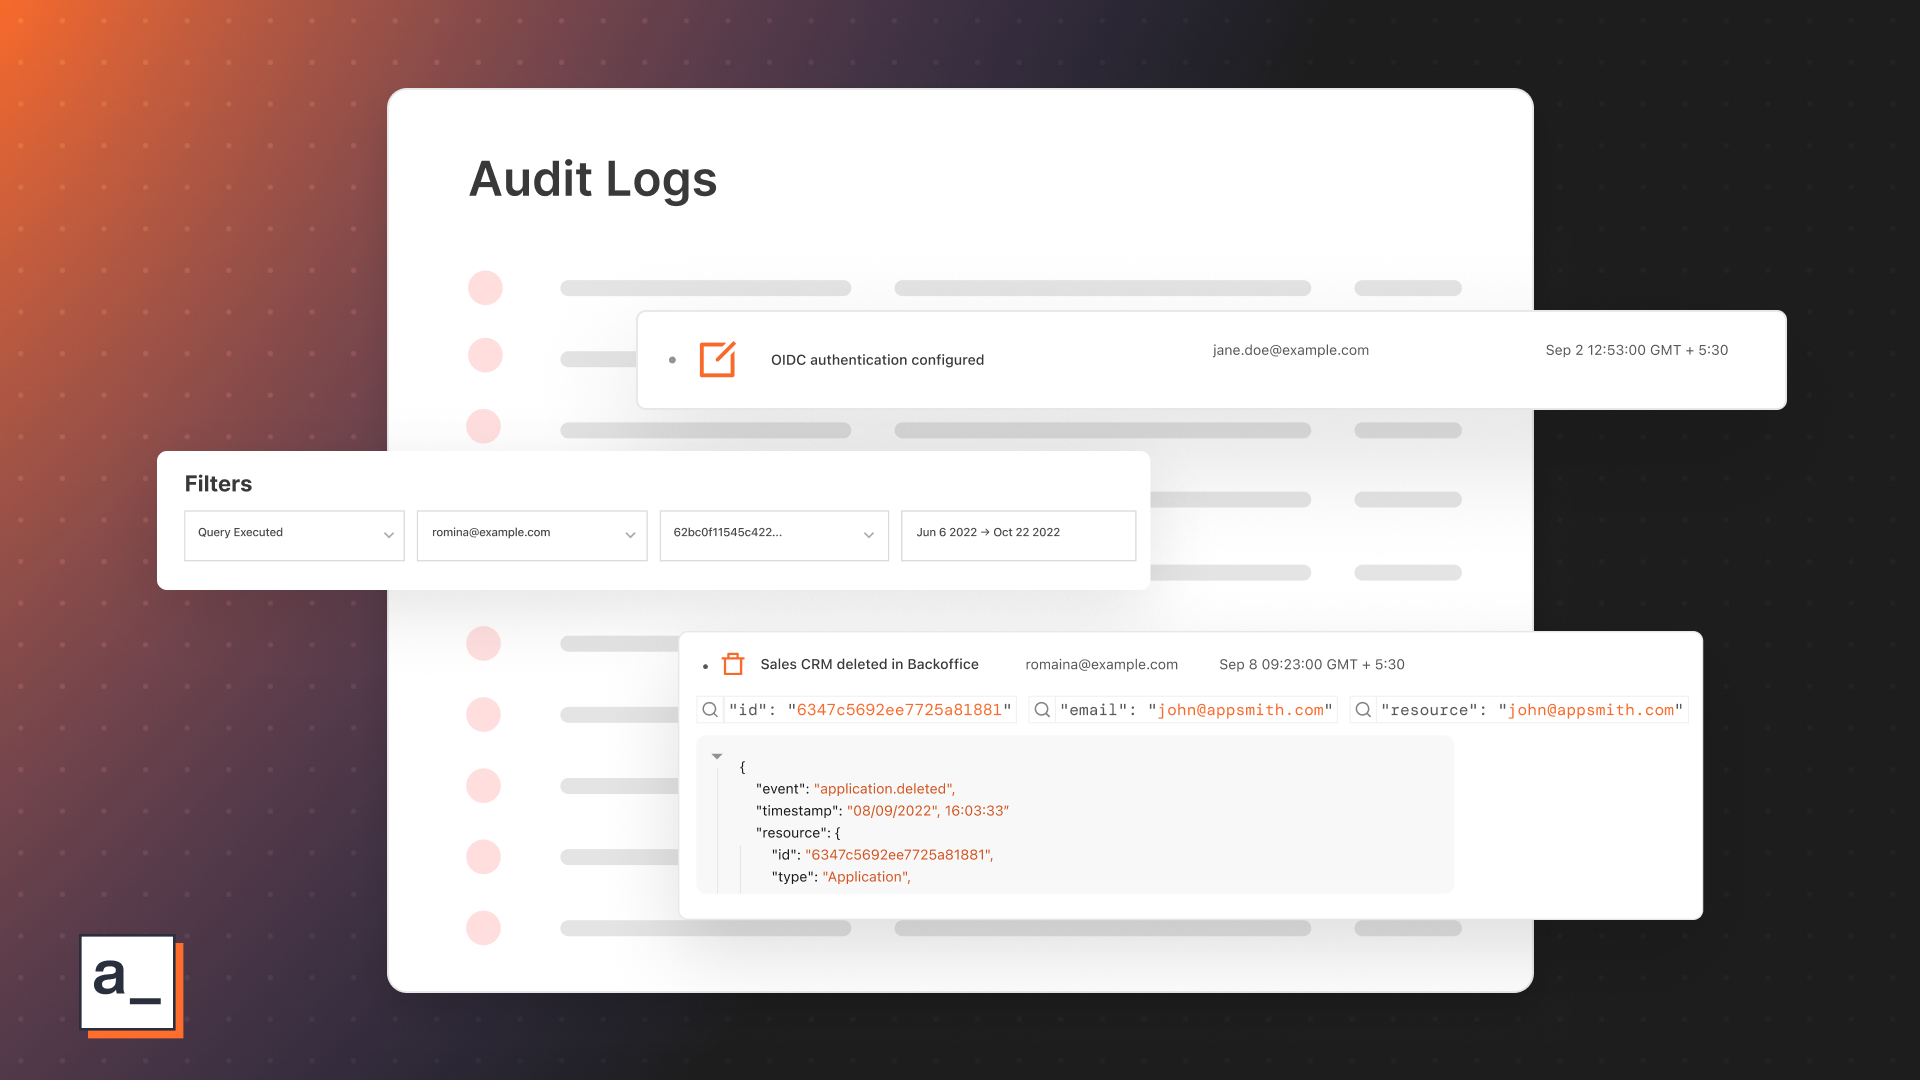 Audit Logs are now available on Appsmith Business